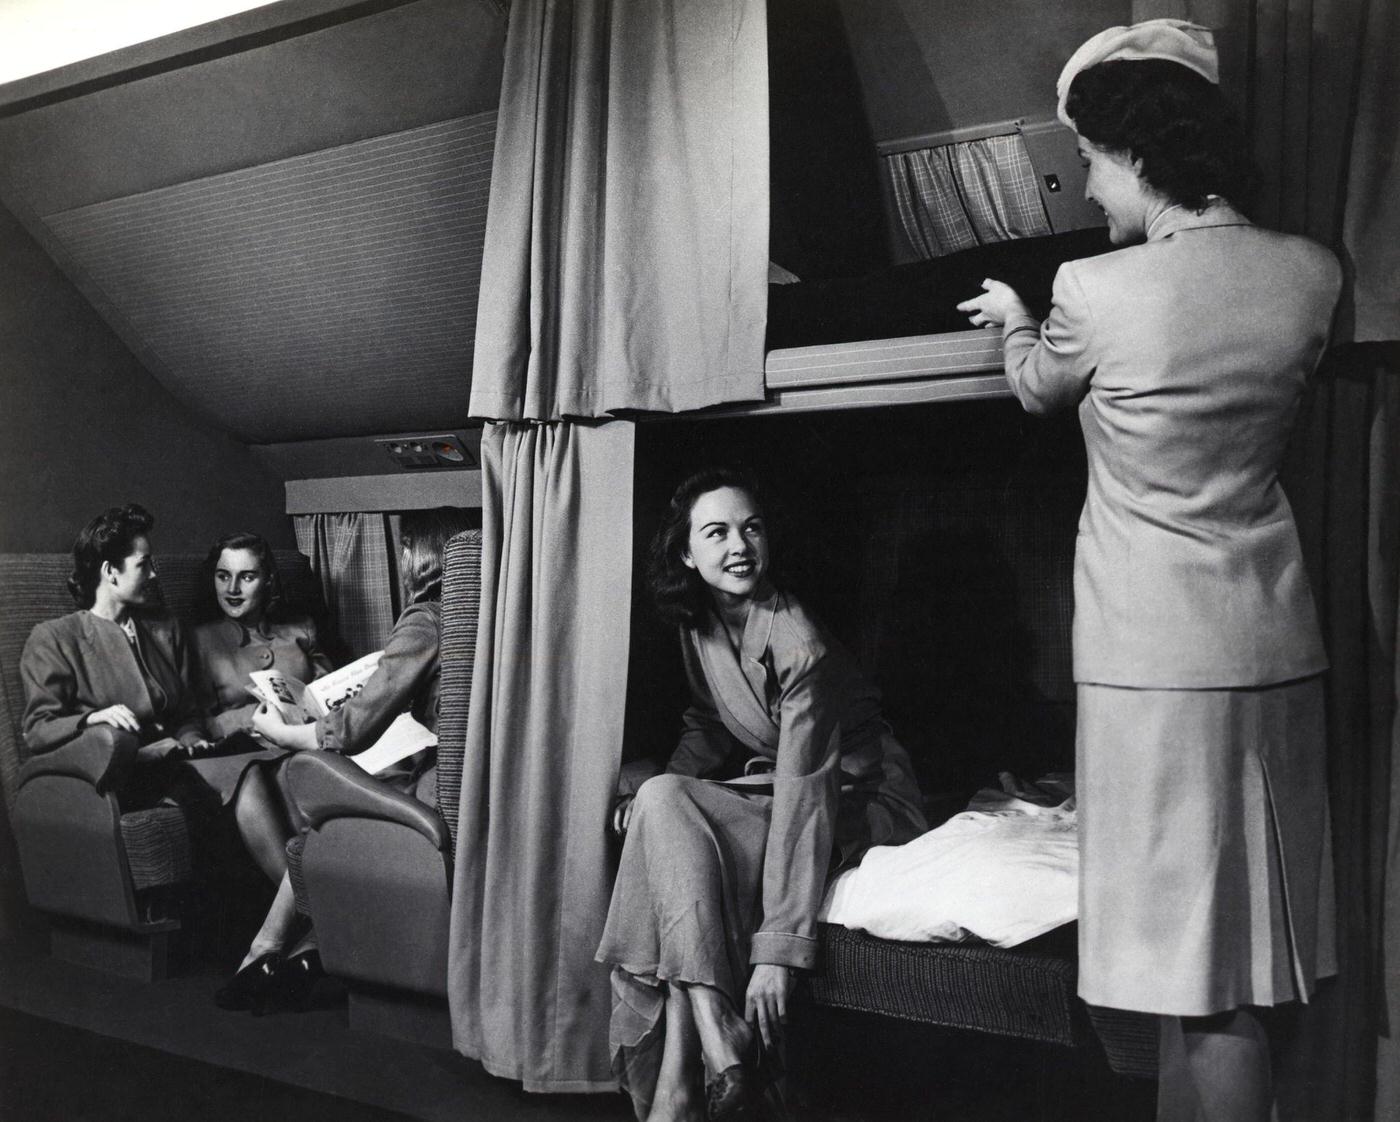 The interior of a McDonnell Douglas DC-6 is shown with flight attendants working with passengers to make the cabin comfortable.